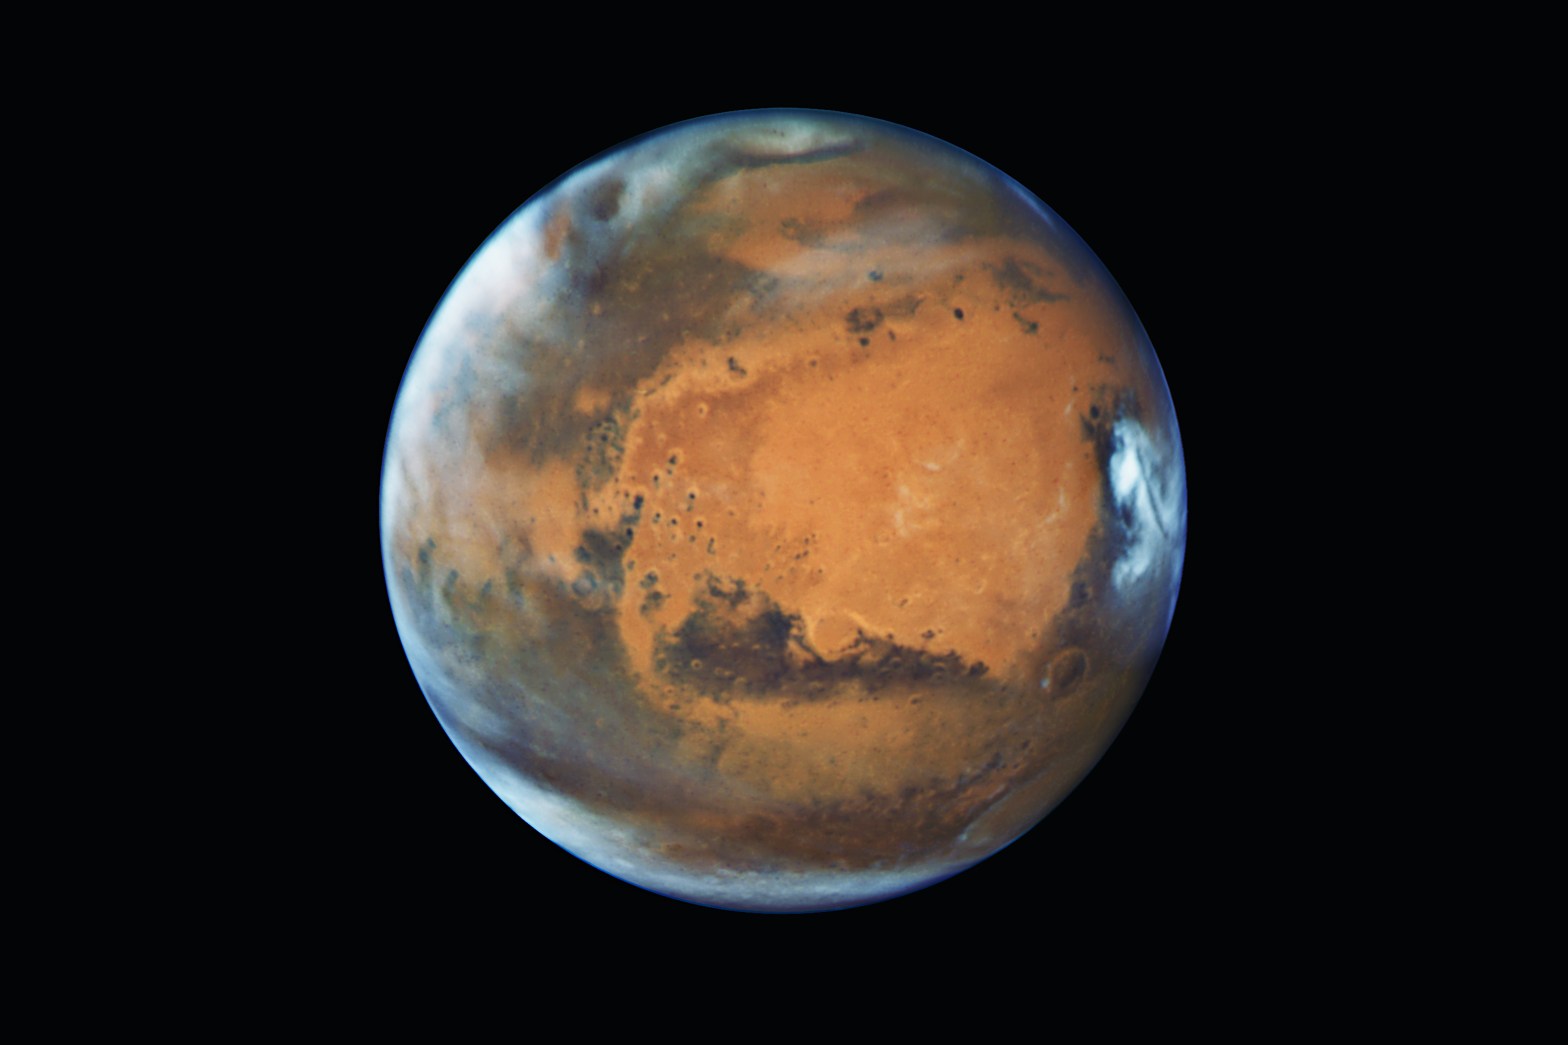 Mars is a dynamic world that continues to intrigue us. This image, captured by the Hubble Space Telescope, shows the planet wreathed in late-afternoon clouds.